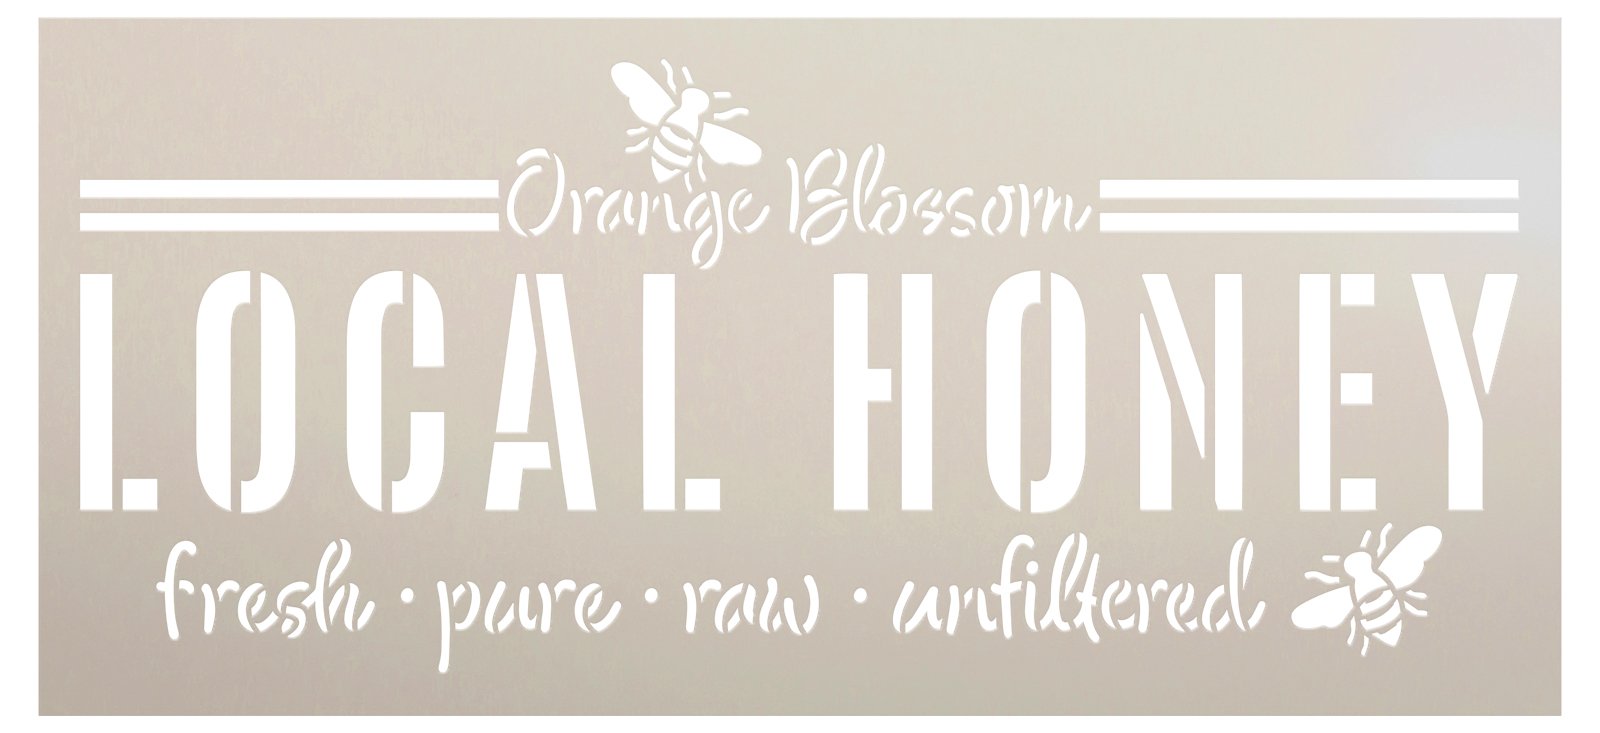 Orange Blossom Local Honey with Bee Stencil by StudioR12 | Beehive, Farmer's Market | Craft DIY Living Room Decor | Easy Painting Ideas | Select Size